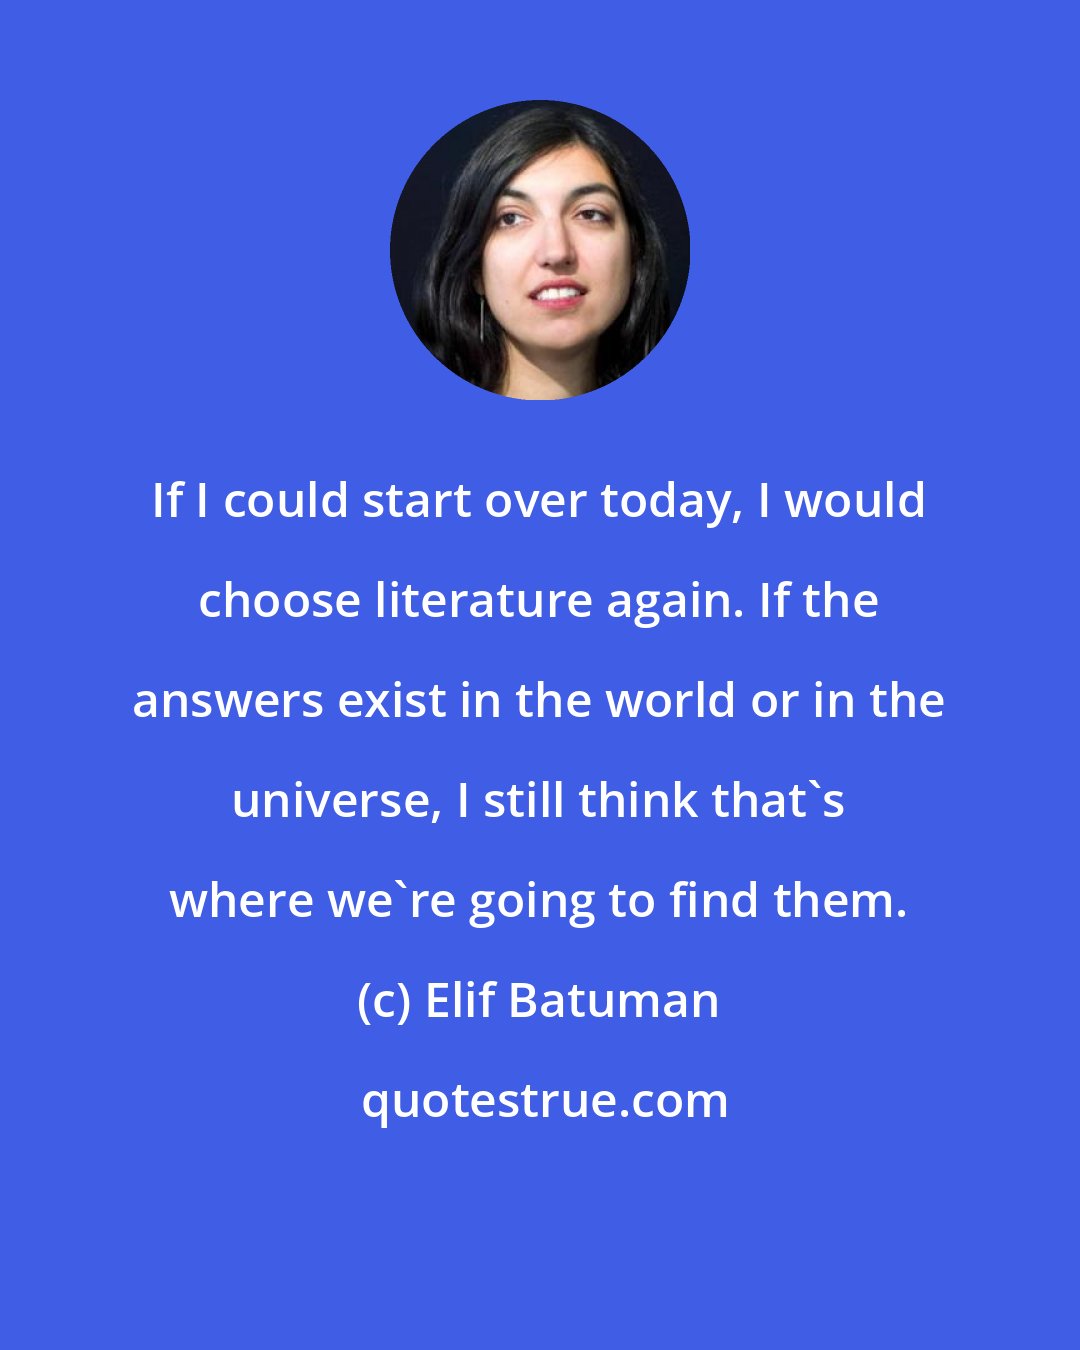 Elif Batuman: If I could start over today, I would choose literature again. If the answers exist in the world or in the universe, I still think that's where we're going to find them.